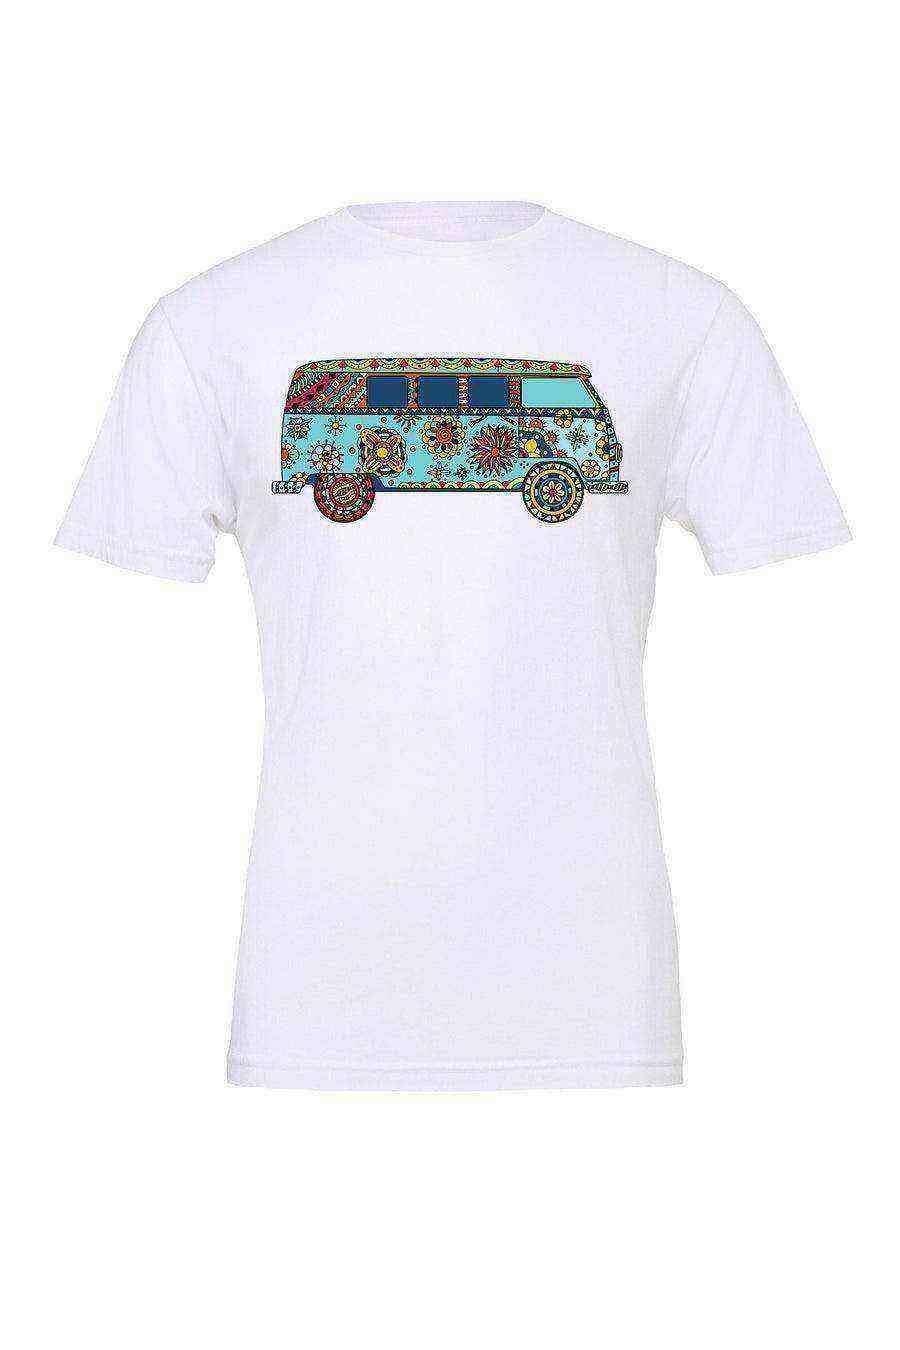 Toddler | Peace & Love Bus Tee | Graphic Tee - Dylan's Tees